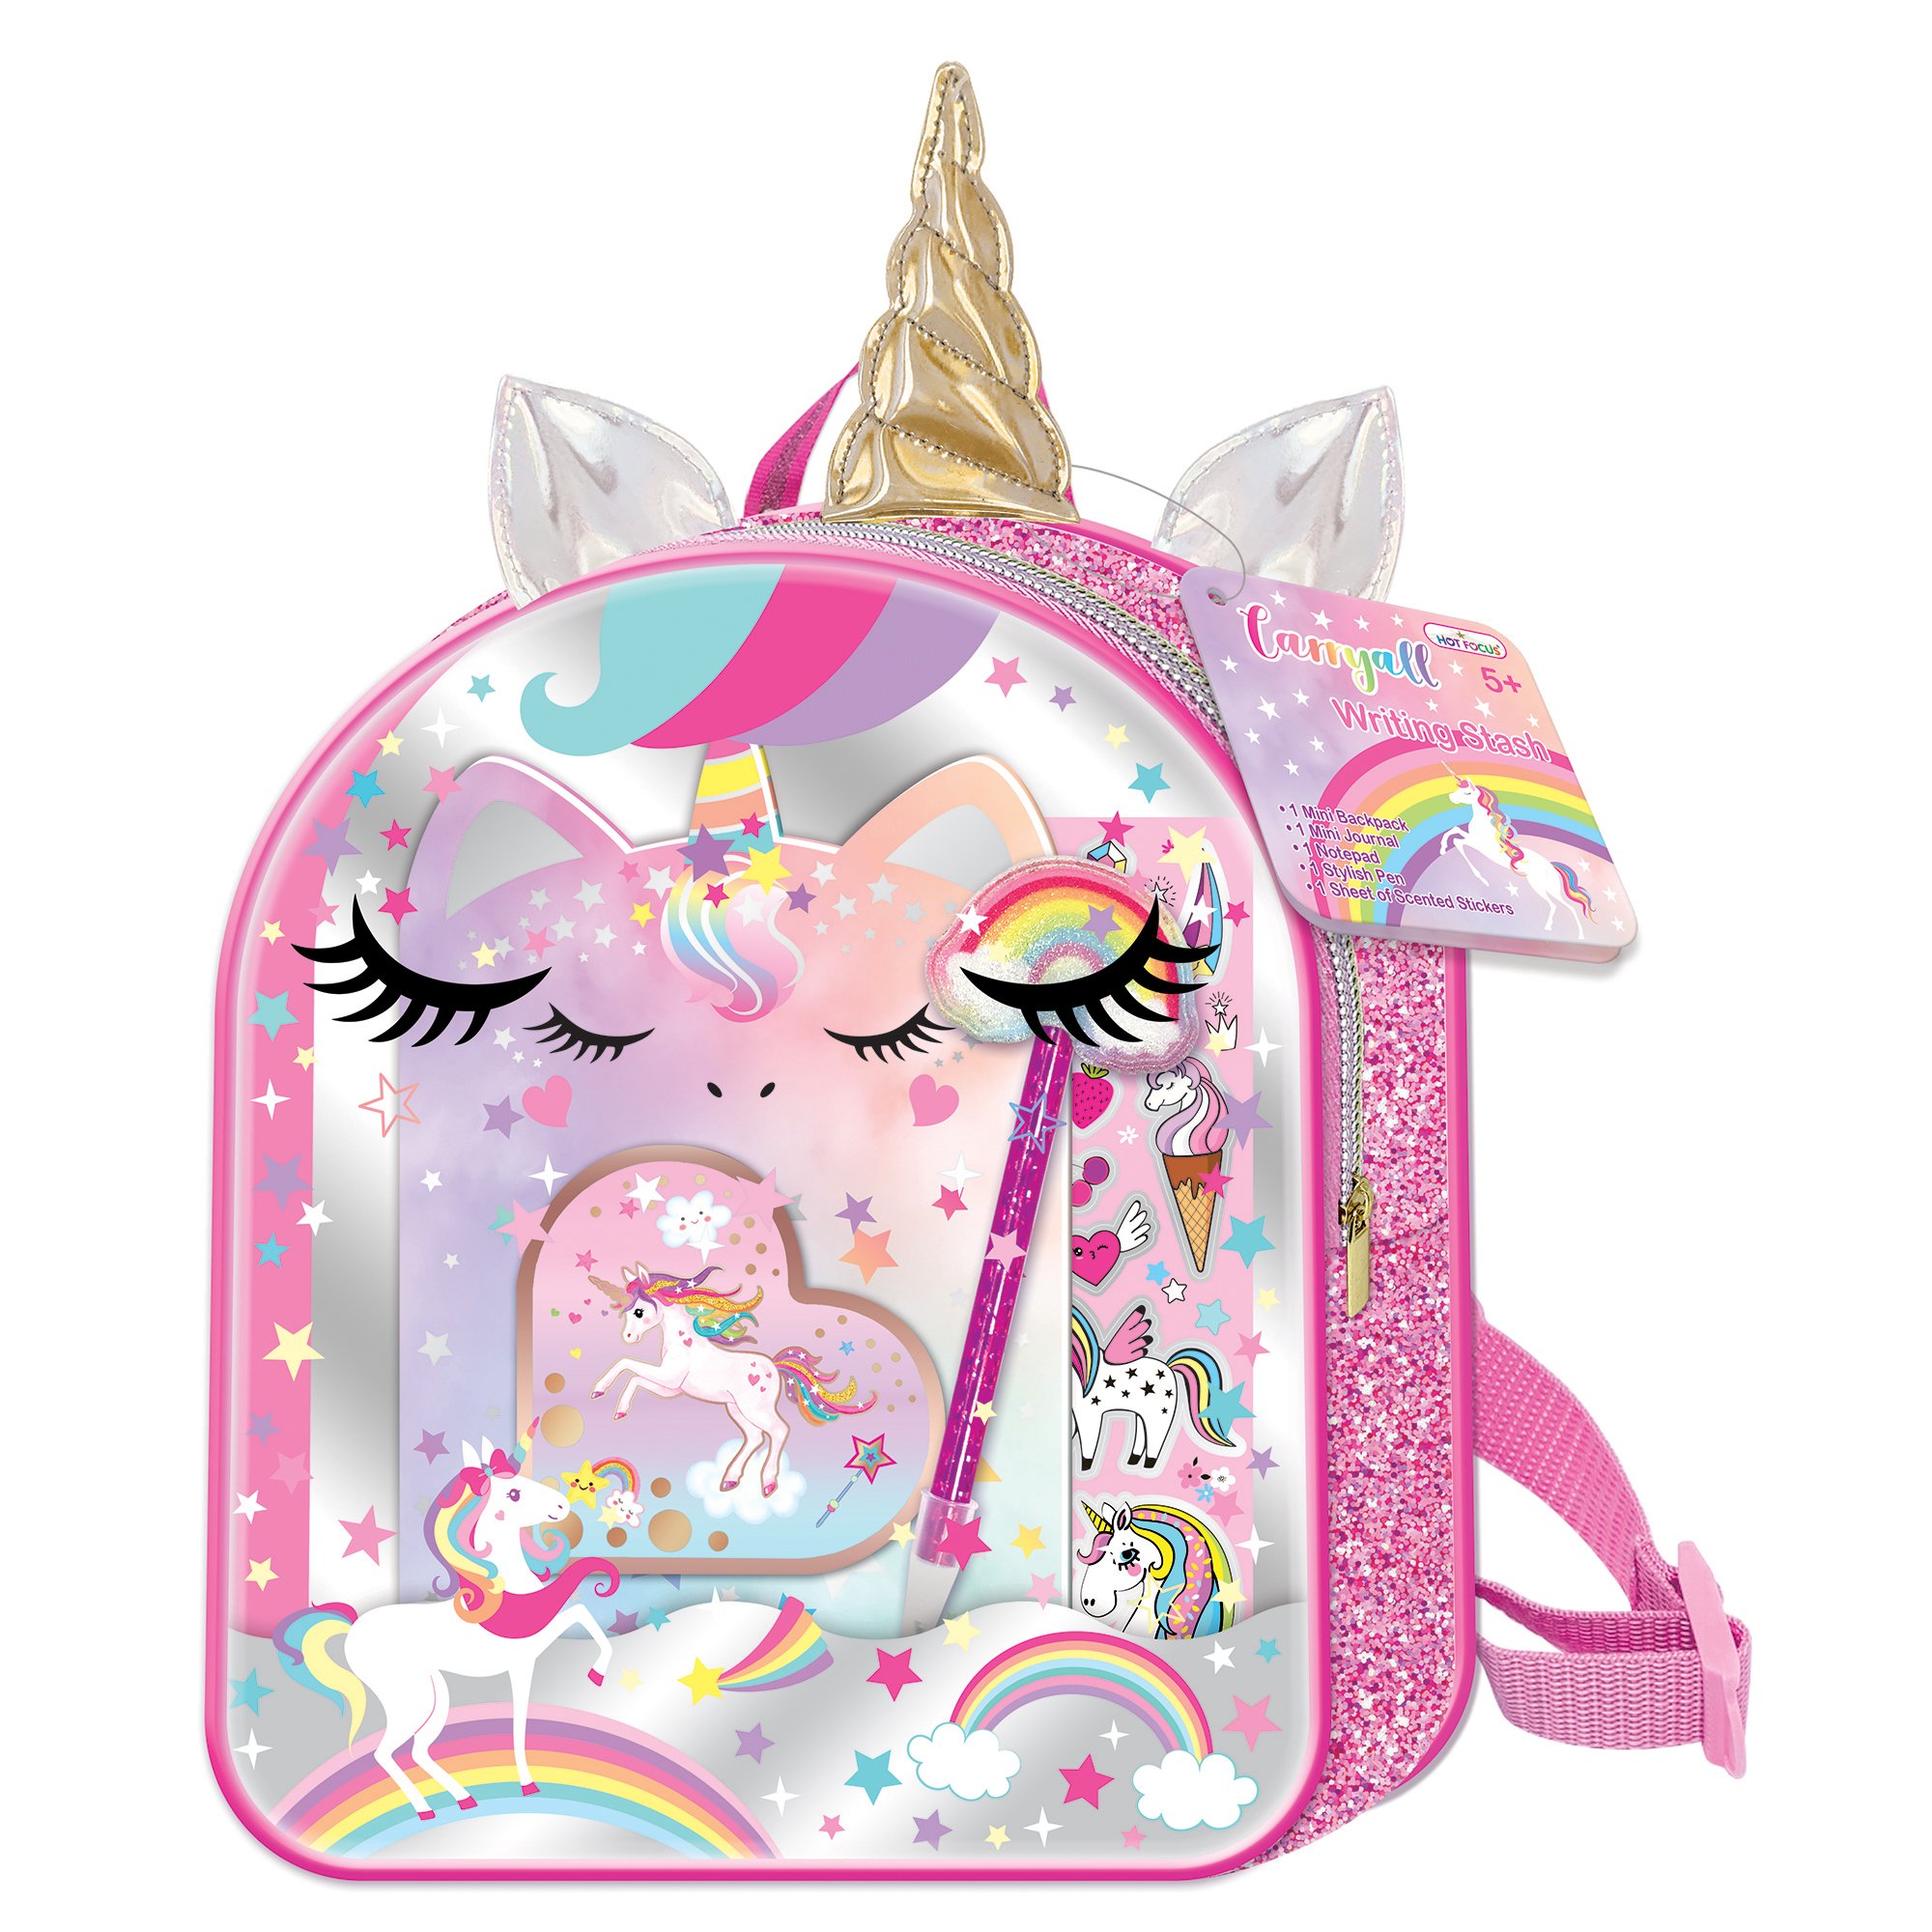 Glimmer Wish Unicorn Selfcare Keepall and Cloud Pouch